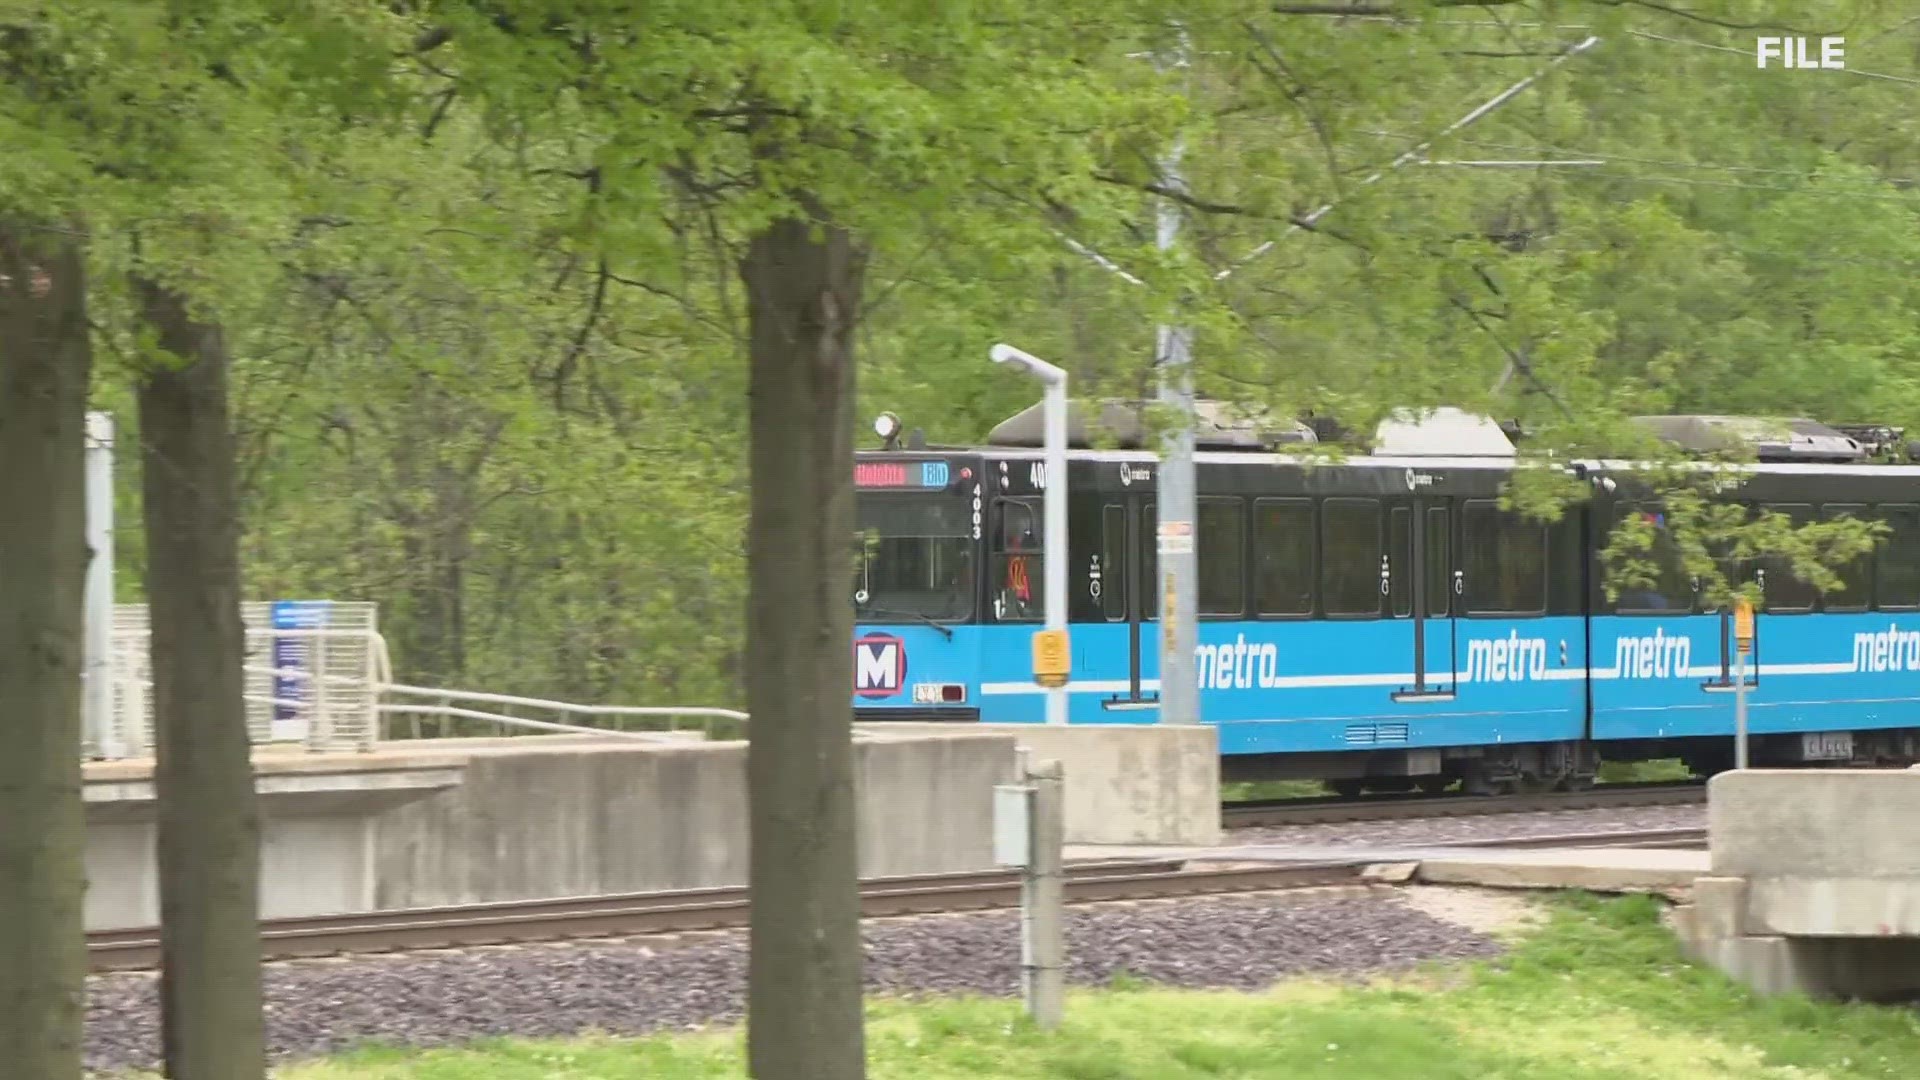 A man was shot and killed while riding a MetroLink train Tuesday morning.